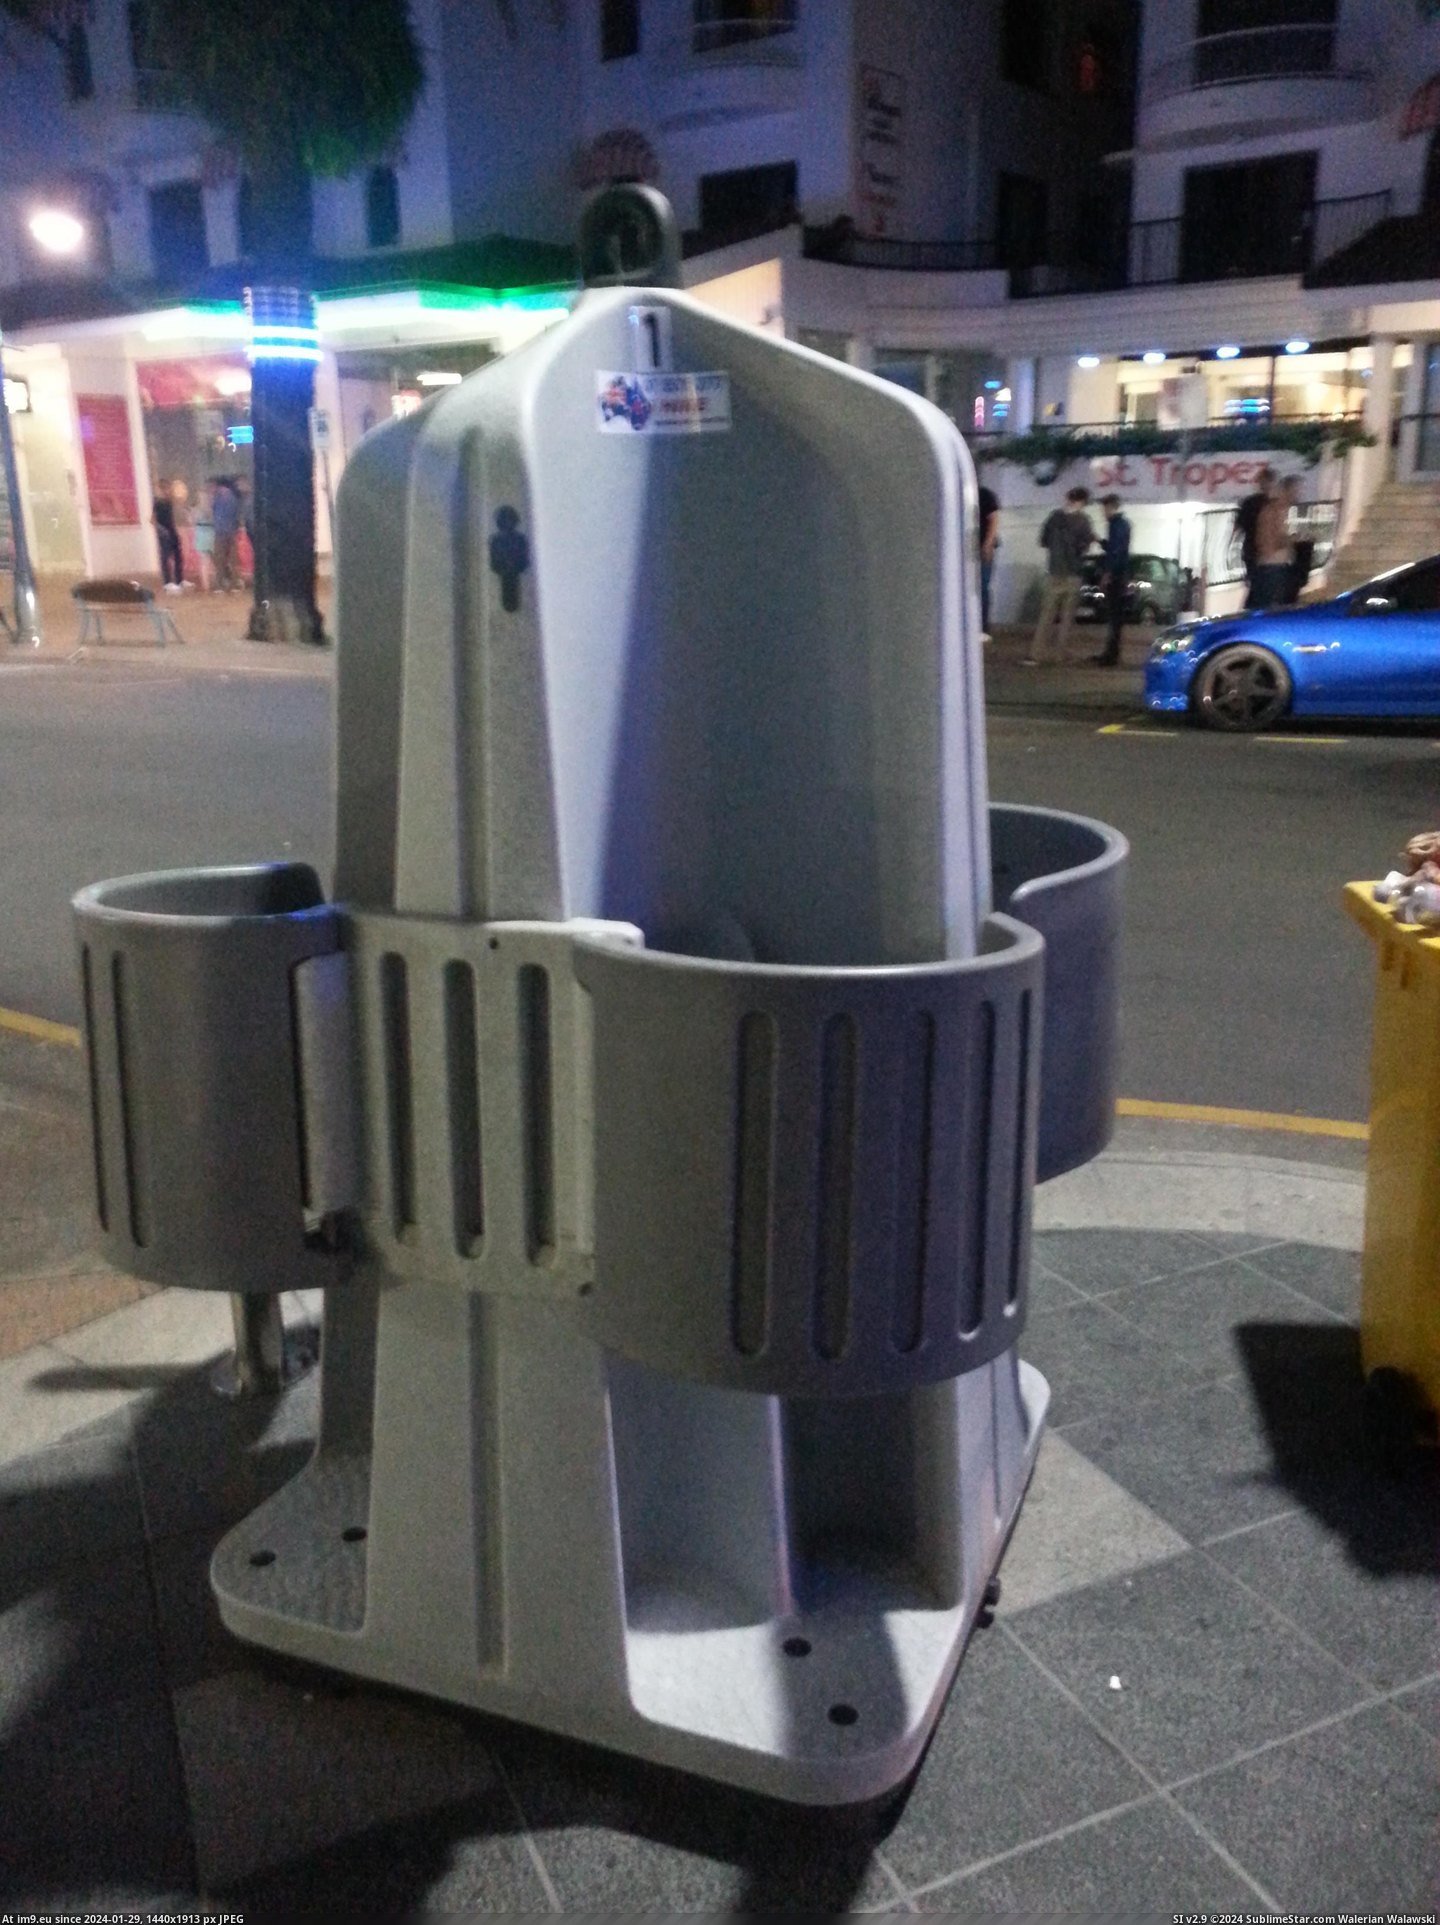 #Wtf #People #City #Installed #Urinals #Public #Outdoor #Areas [Wtf] My city just installed these new outdoor urinals in very public areas. People outraged. Pic. (Изображение из альбом My r/WTF favs))